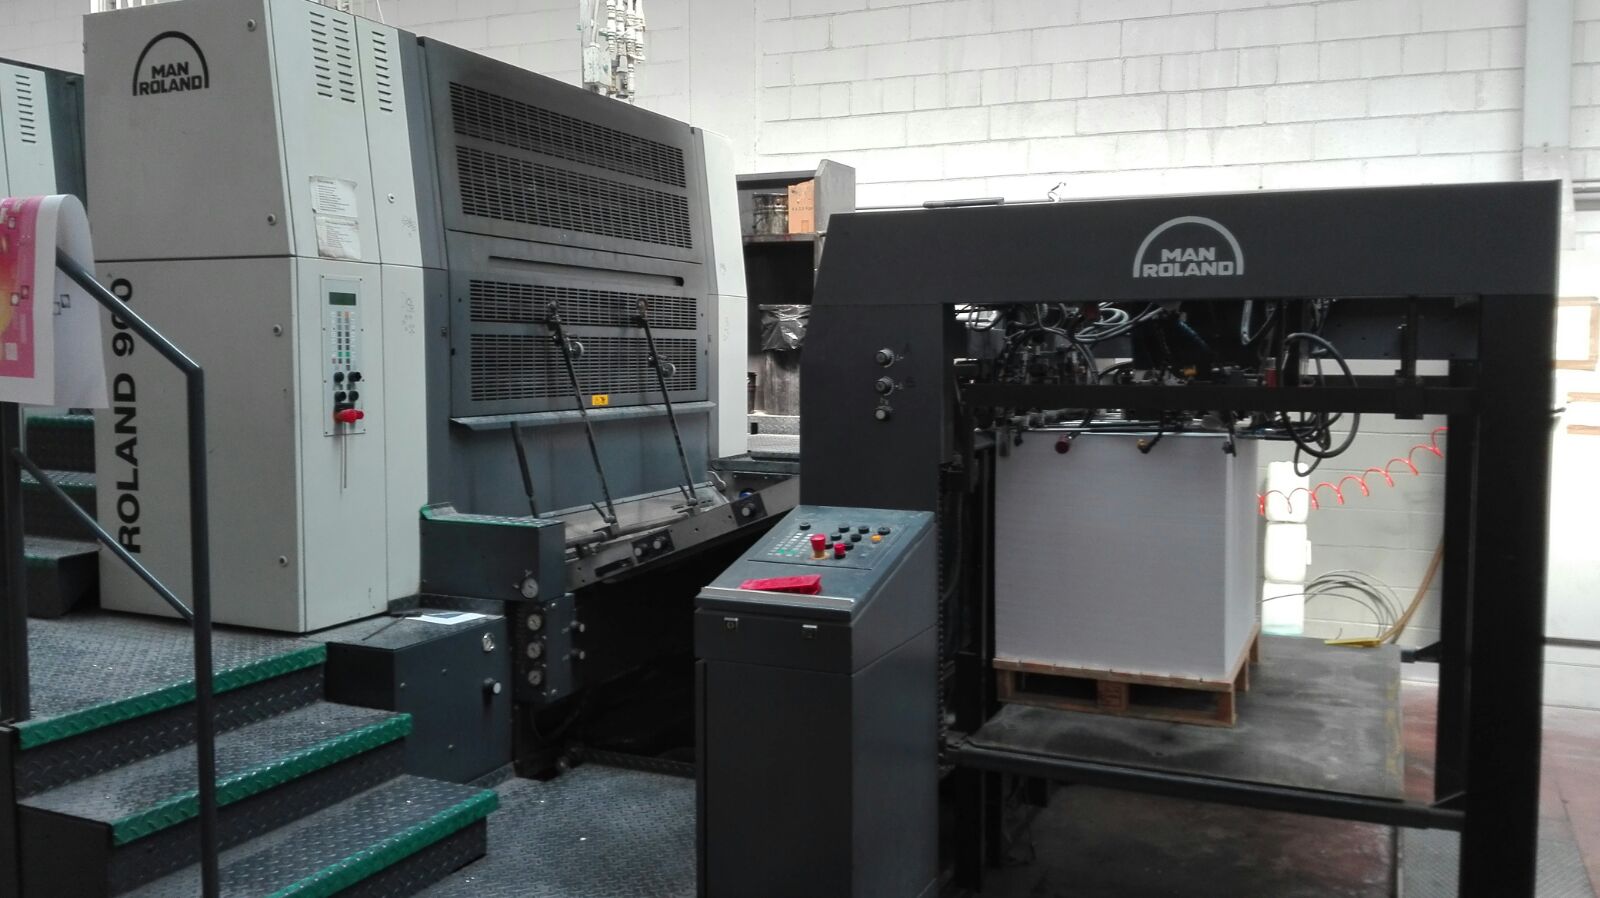 Manroland R-904-6 Sheet Fed / Offset Used Machinery for sale